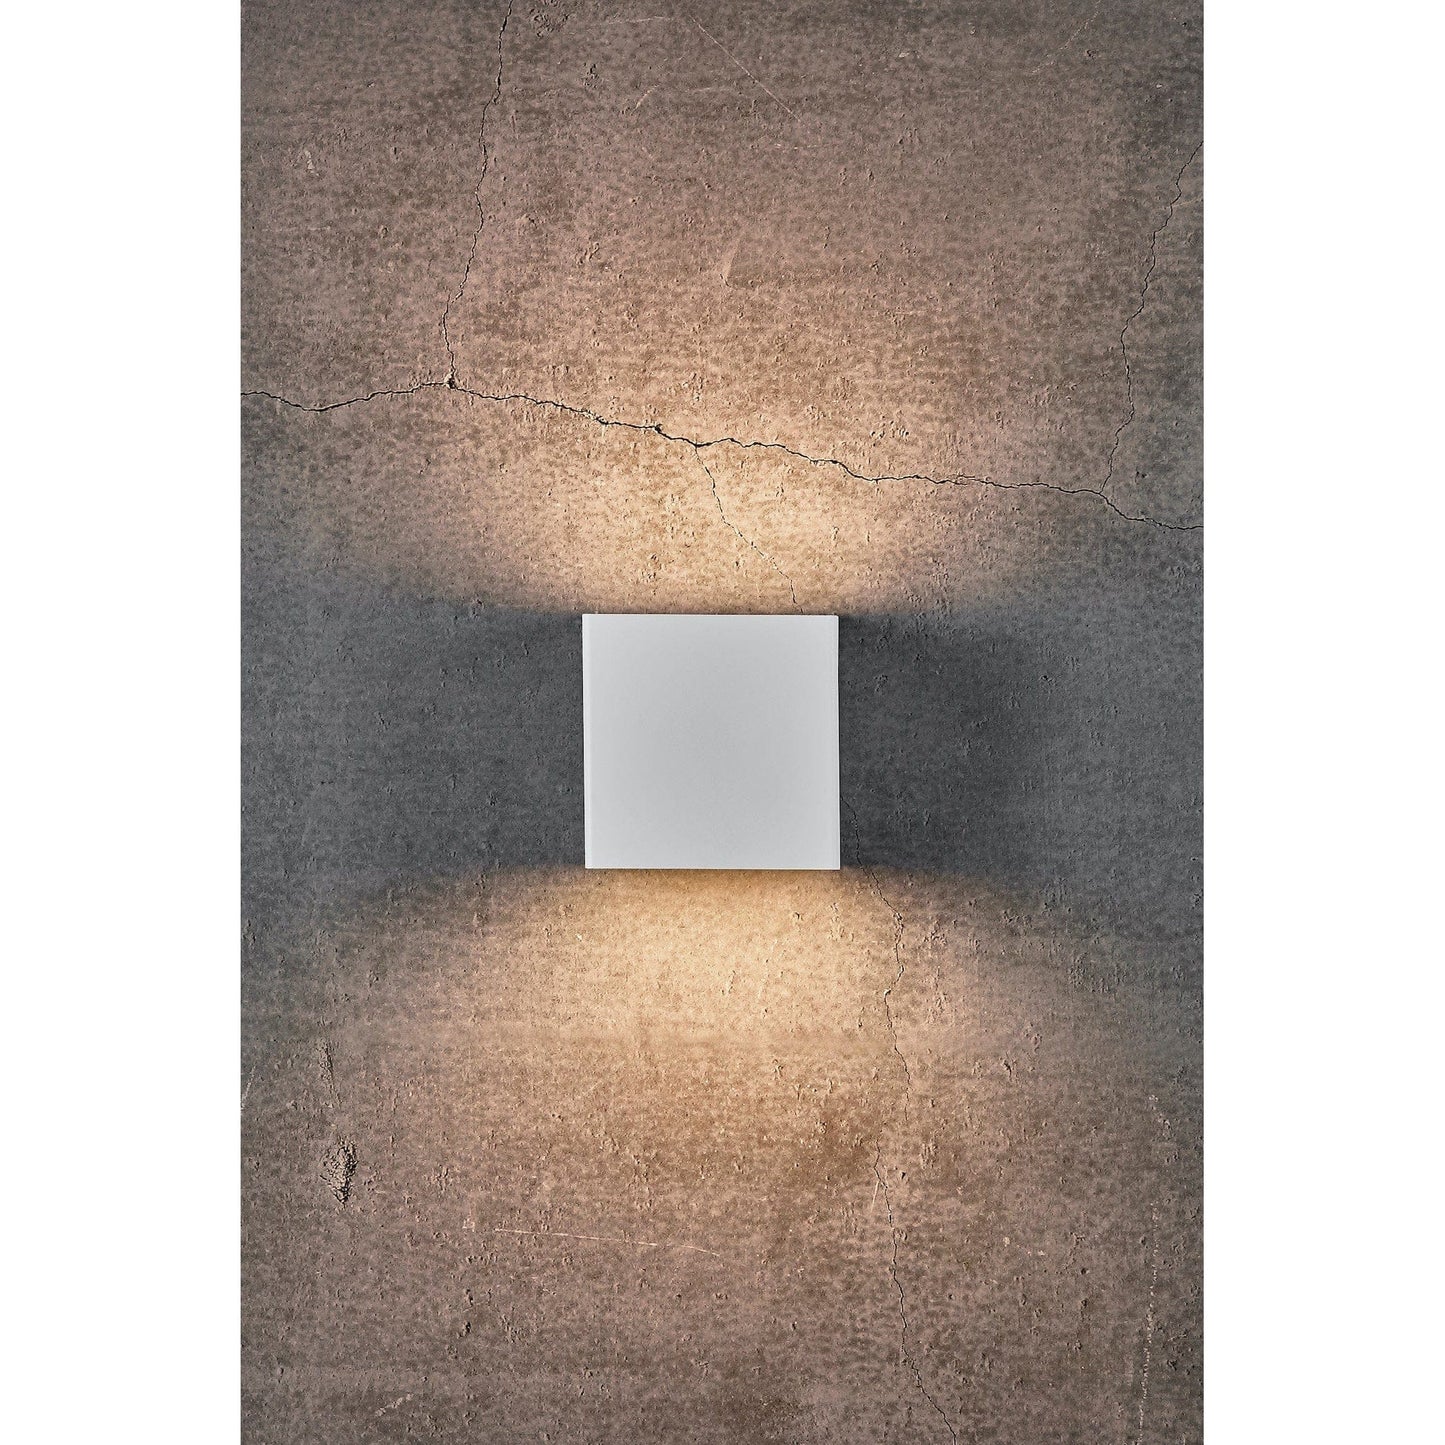 Nordlux Wall Lights White Turn Outdoor / Indoor Wall Light, black or white